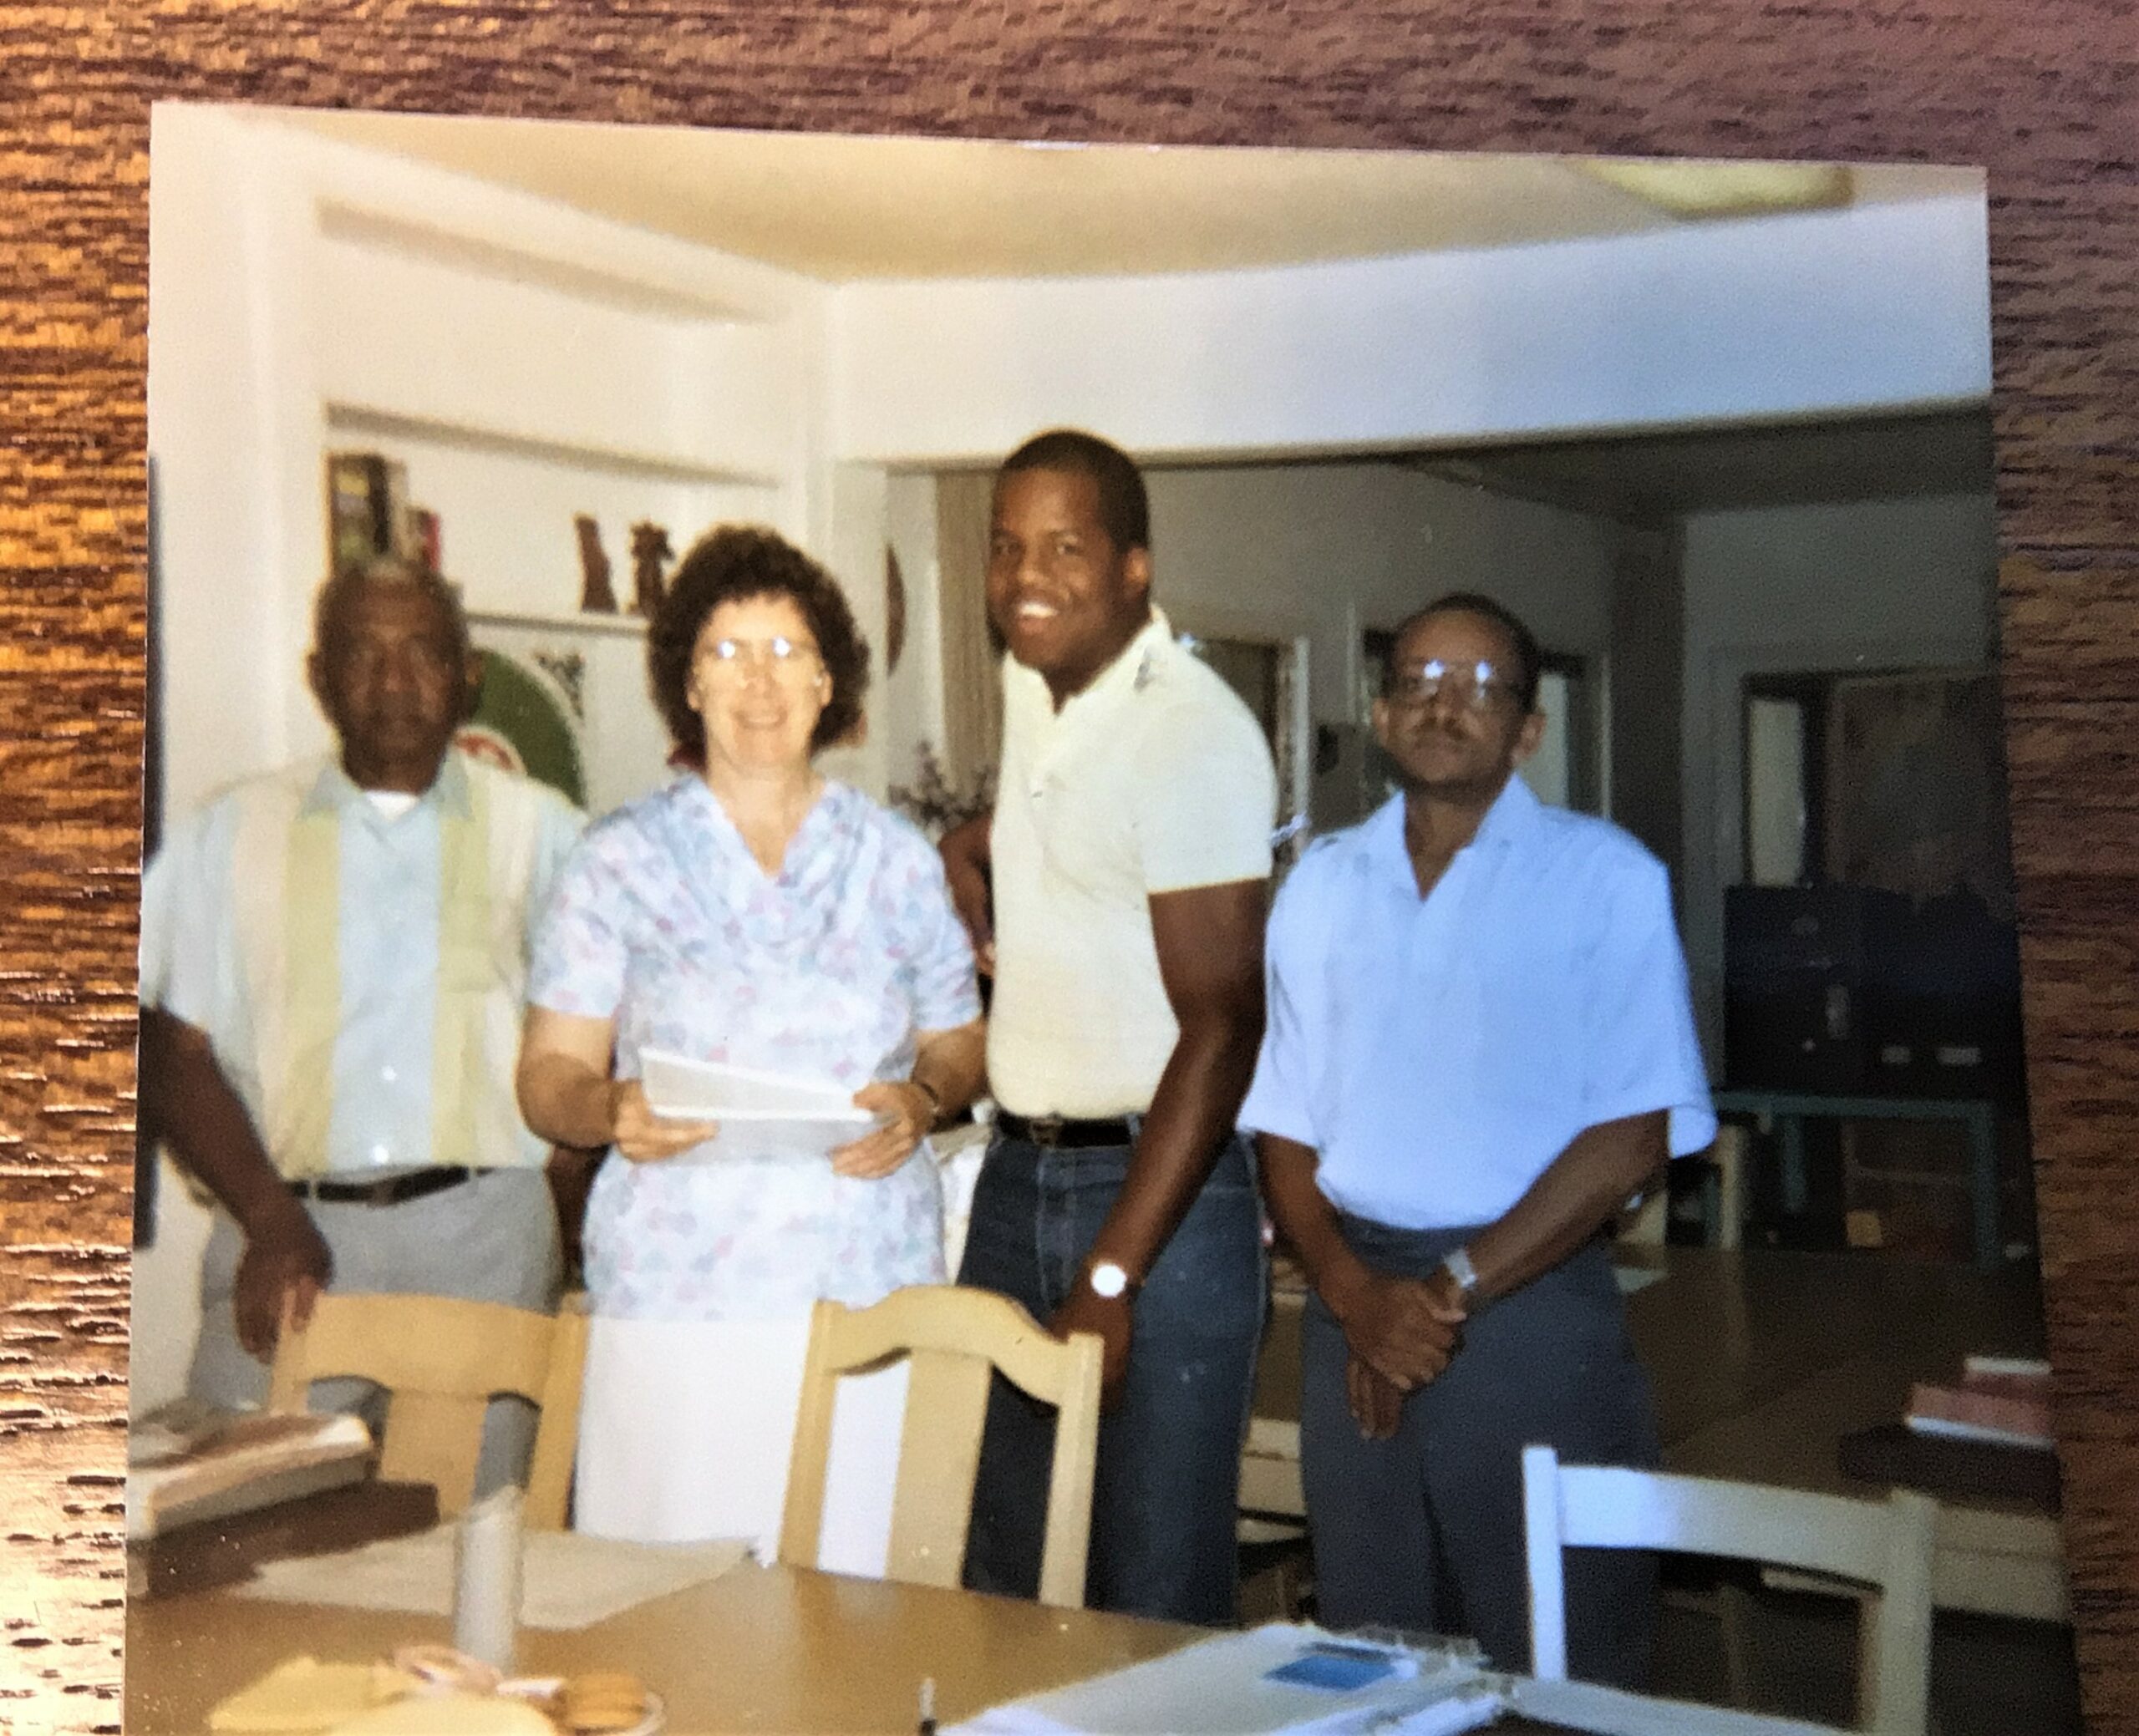 A smiling group of a sister and three Black men.